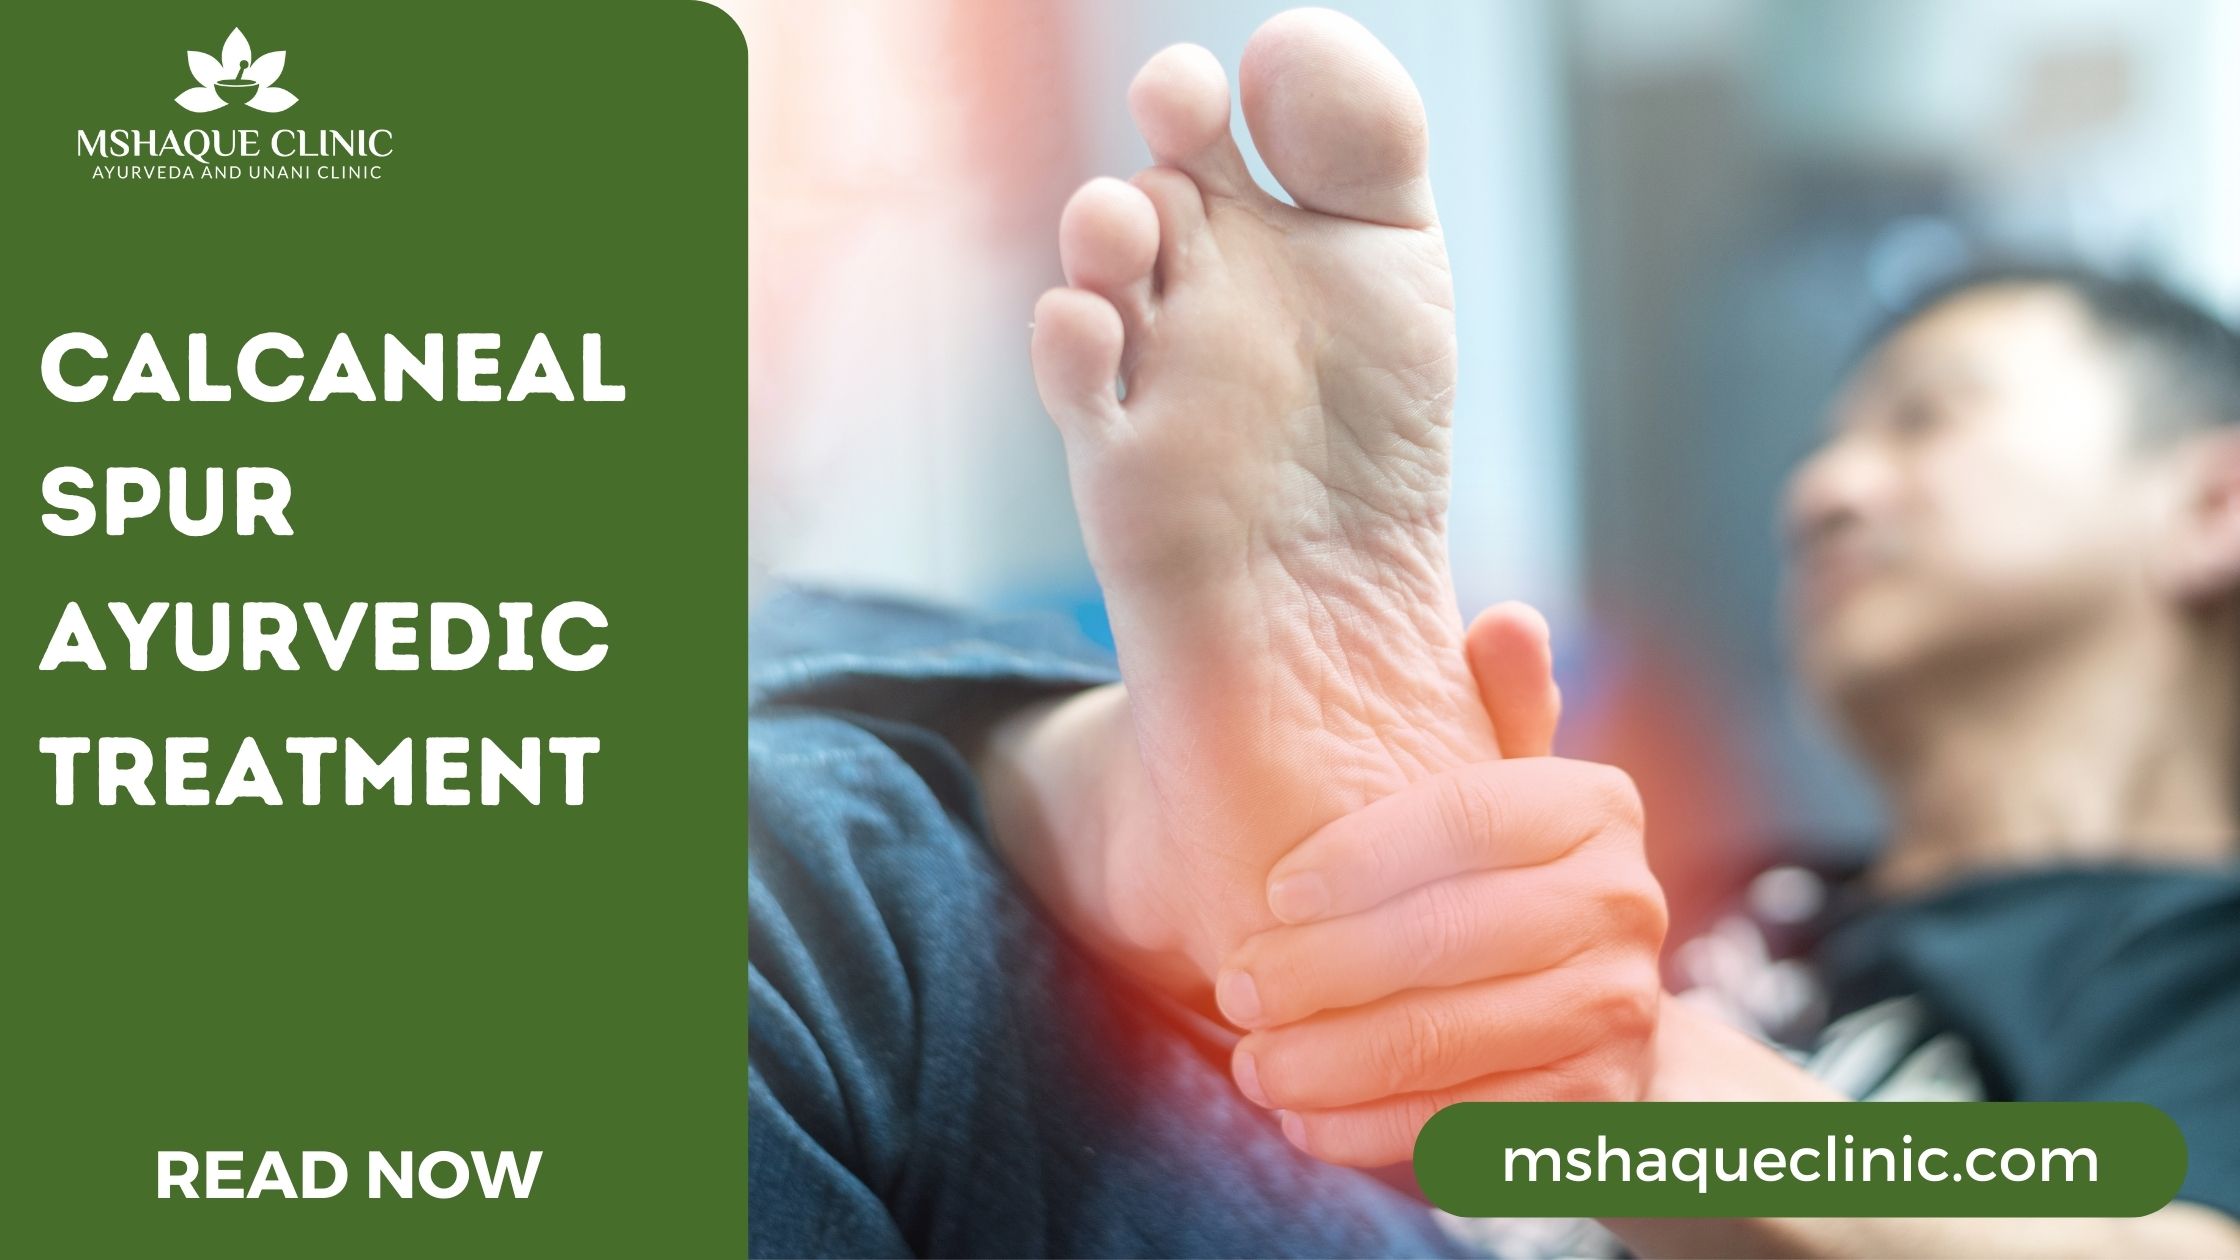 Calcaneal Spur A calcaneal spur, or commonly known as a heel spur, occurs  when a bony outgrowth forms on the heel bone. Calcaneal spurs can be  located at the back of the